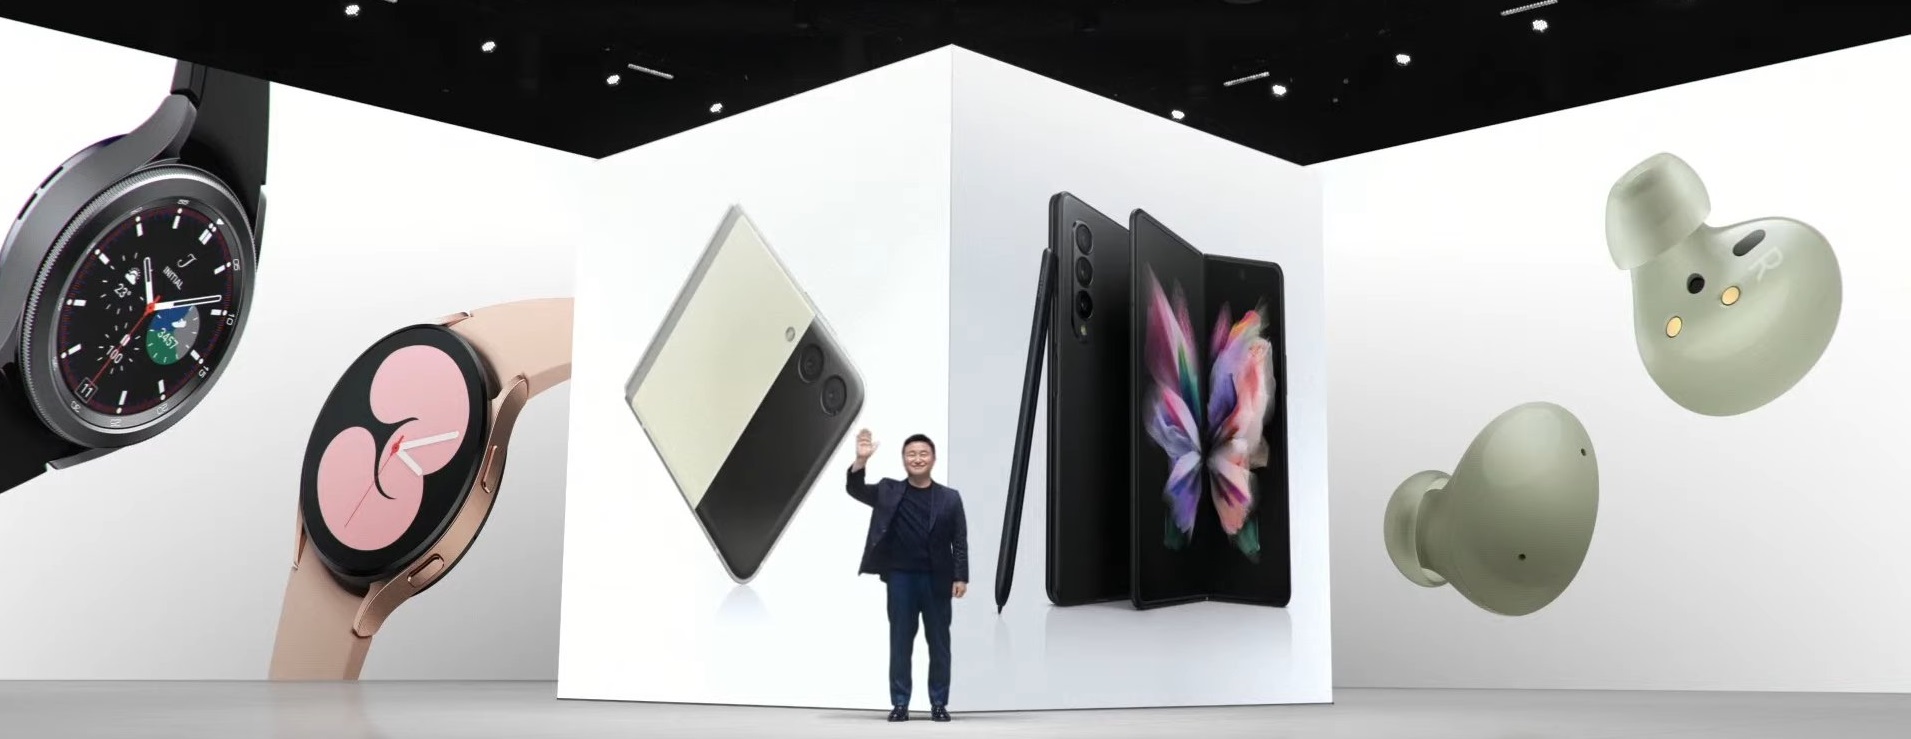 Samsung Galaxy Z Fold 3, Z Flip 3: Unfolding Advanced Foldable Experiences at More Affordable Price Points